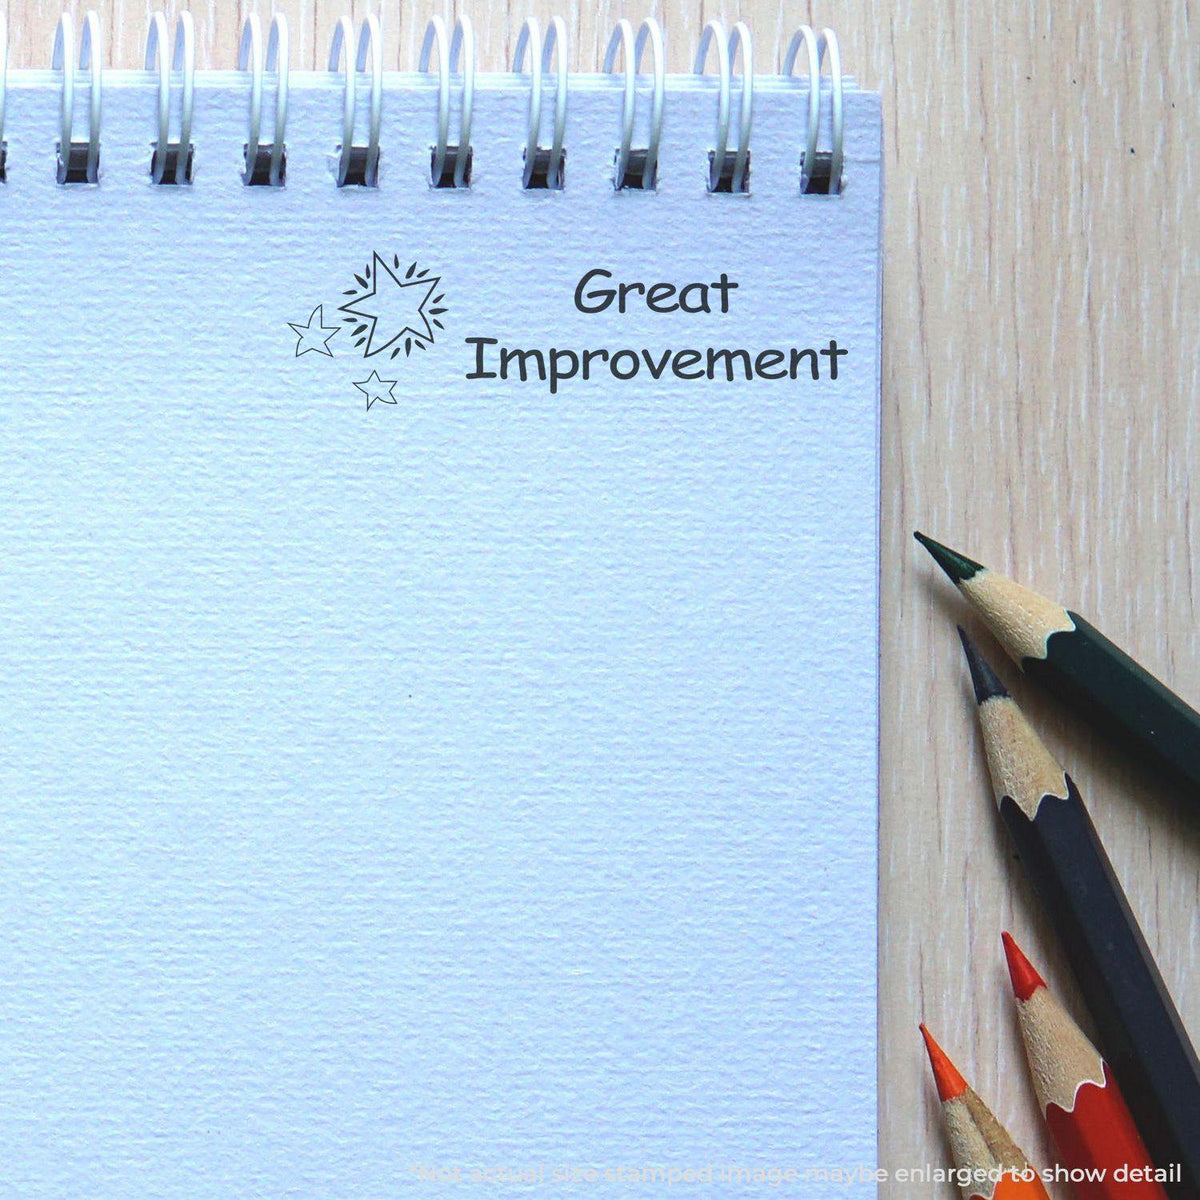 In Use Large Great Improvement Rubber Stamp Image